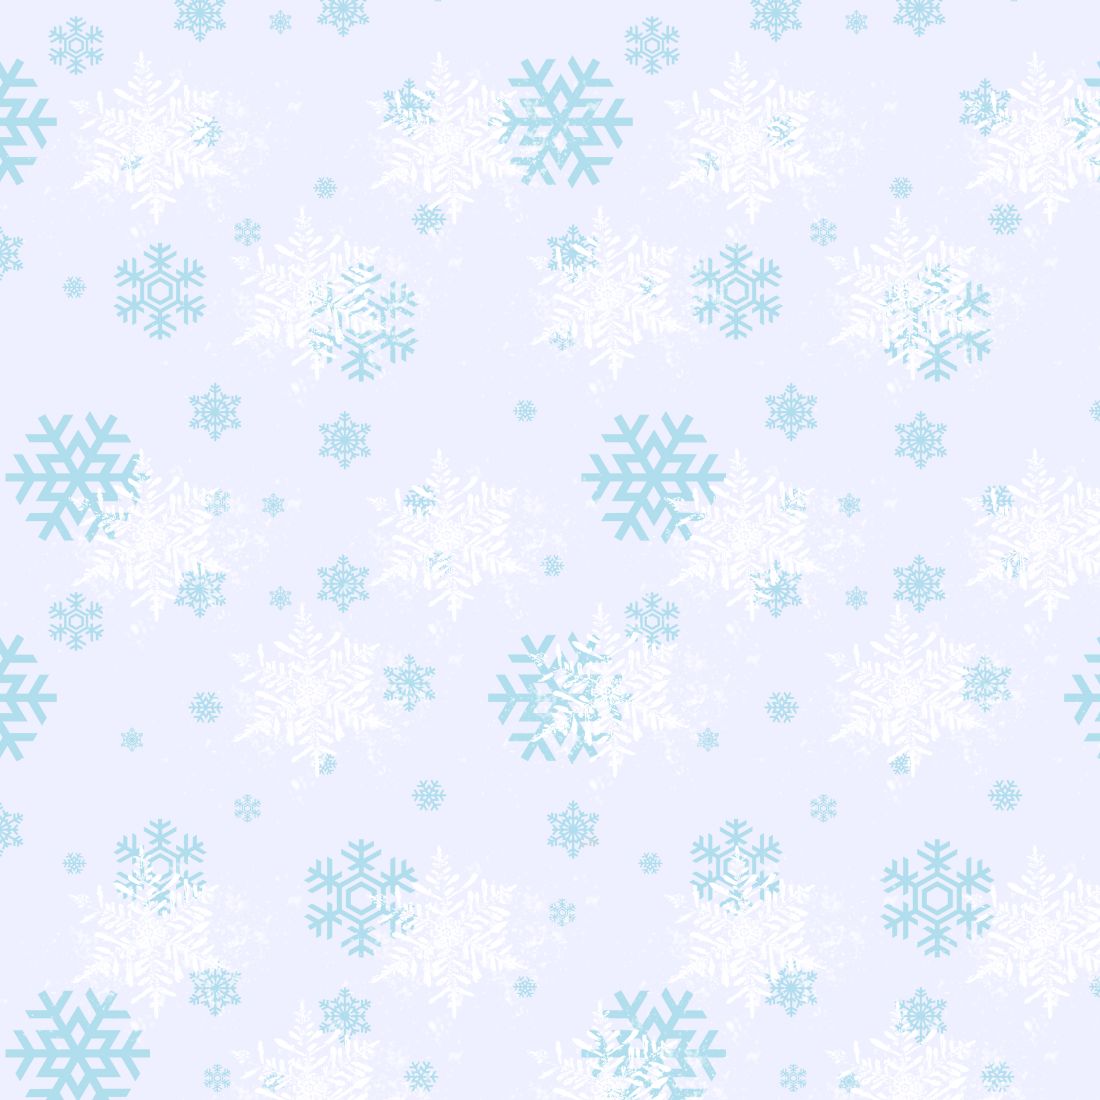 3 winter backgrounds pattern cover image.